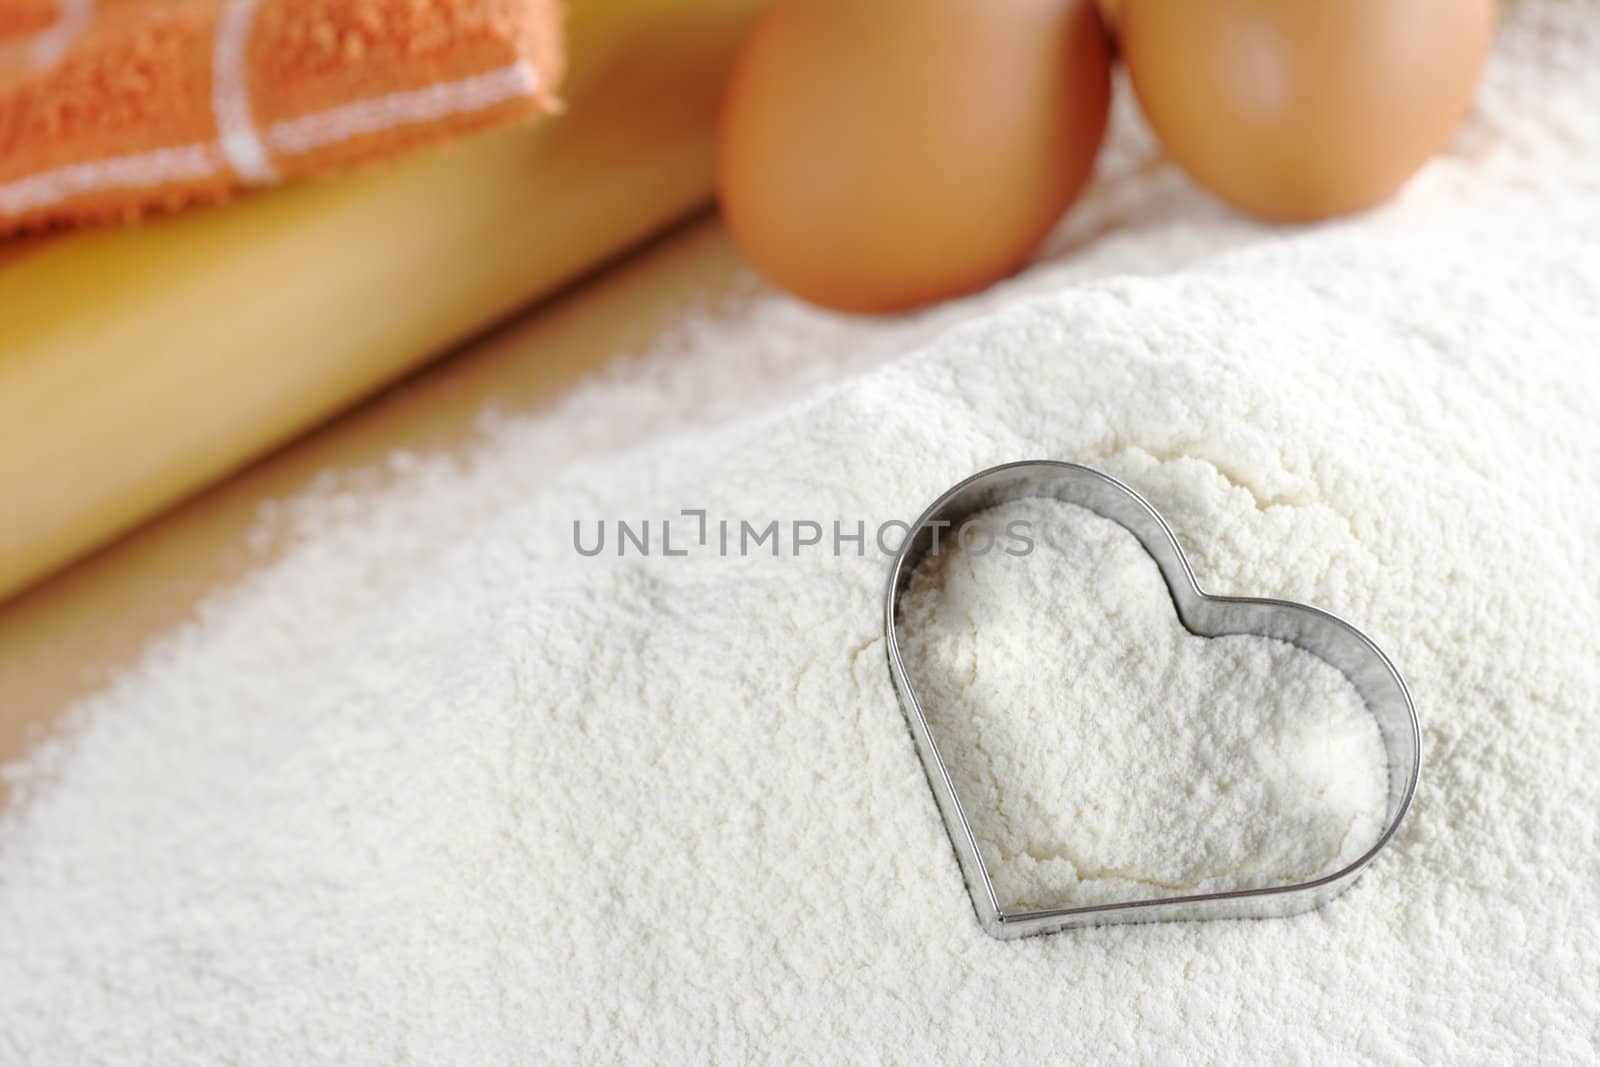 Heart shaped cookie cutter on flour with eggs, rolling pin and dishcloth in the background (Selective Focus, Focus on the cookie cutter)